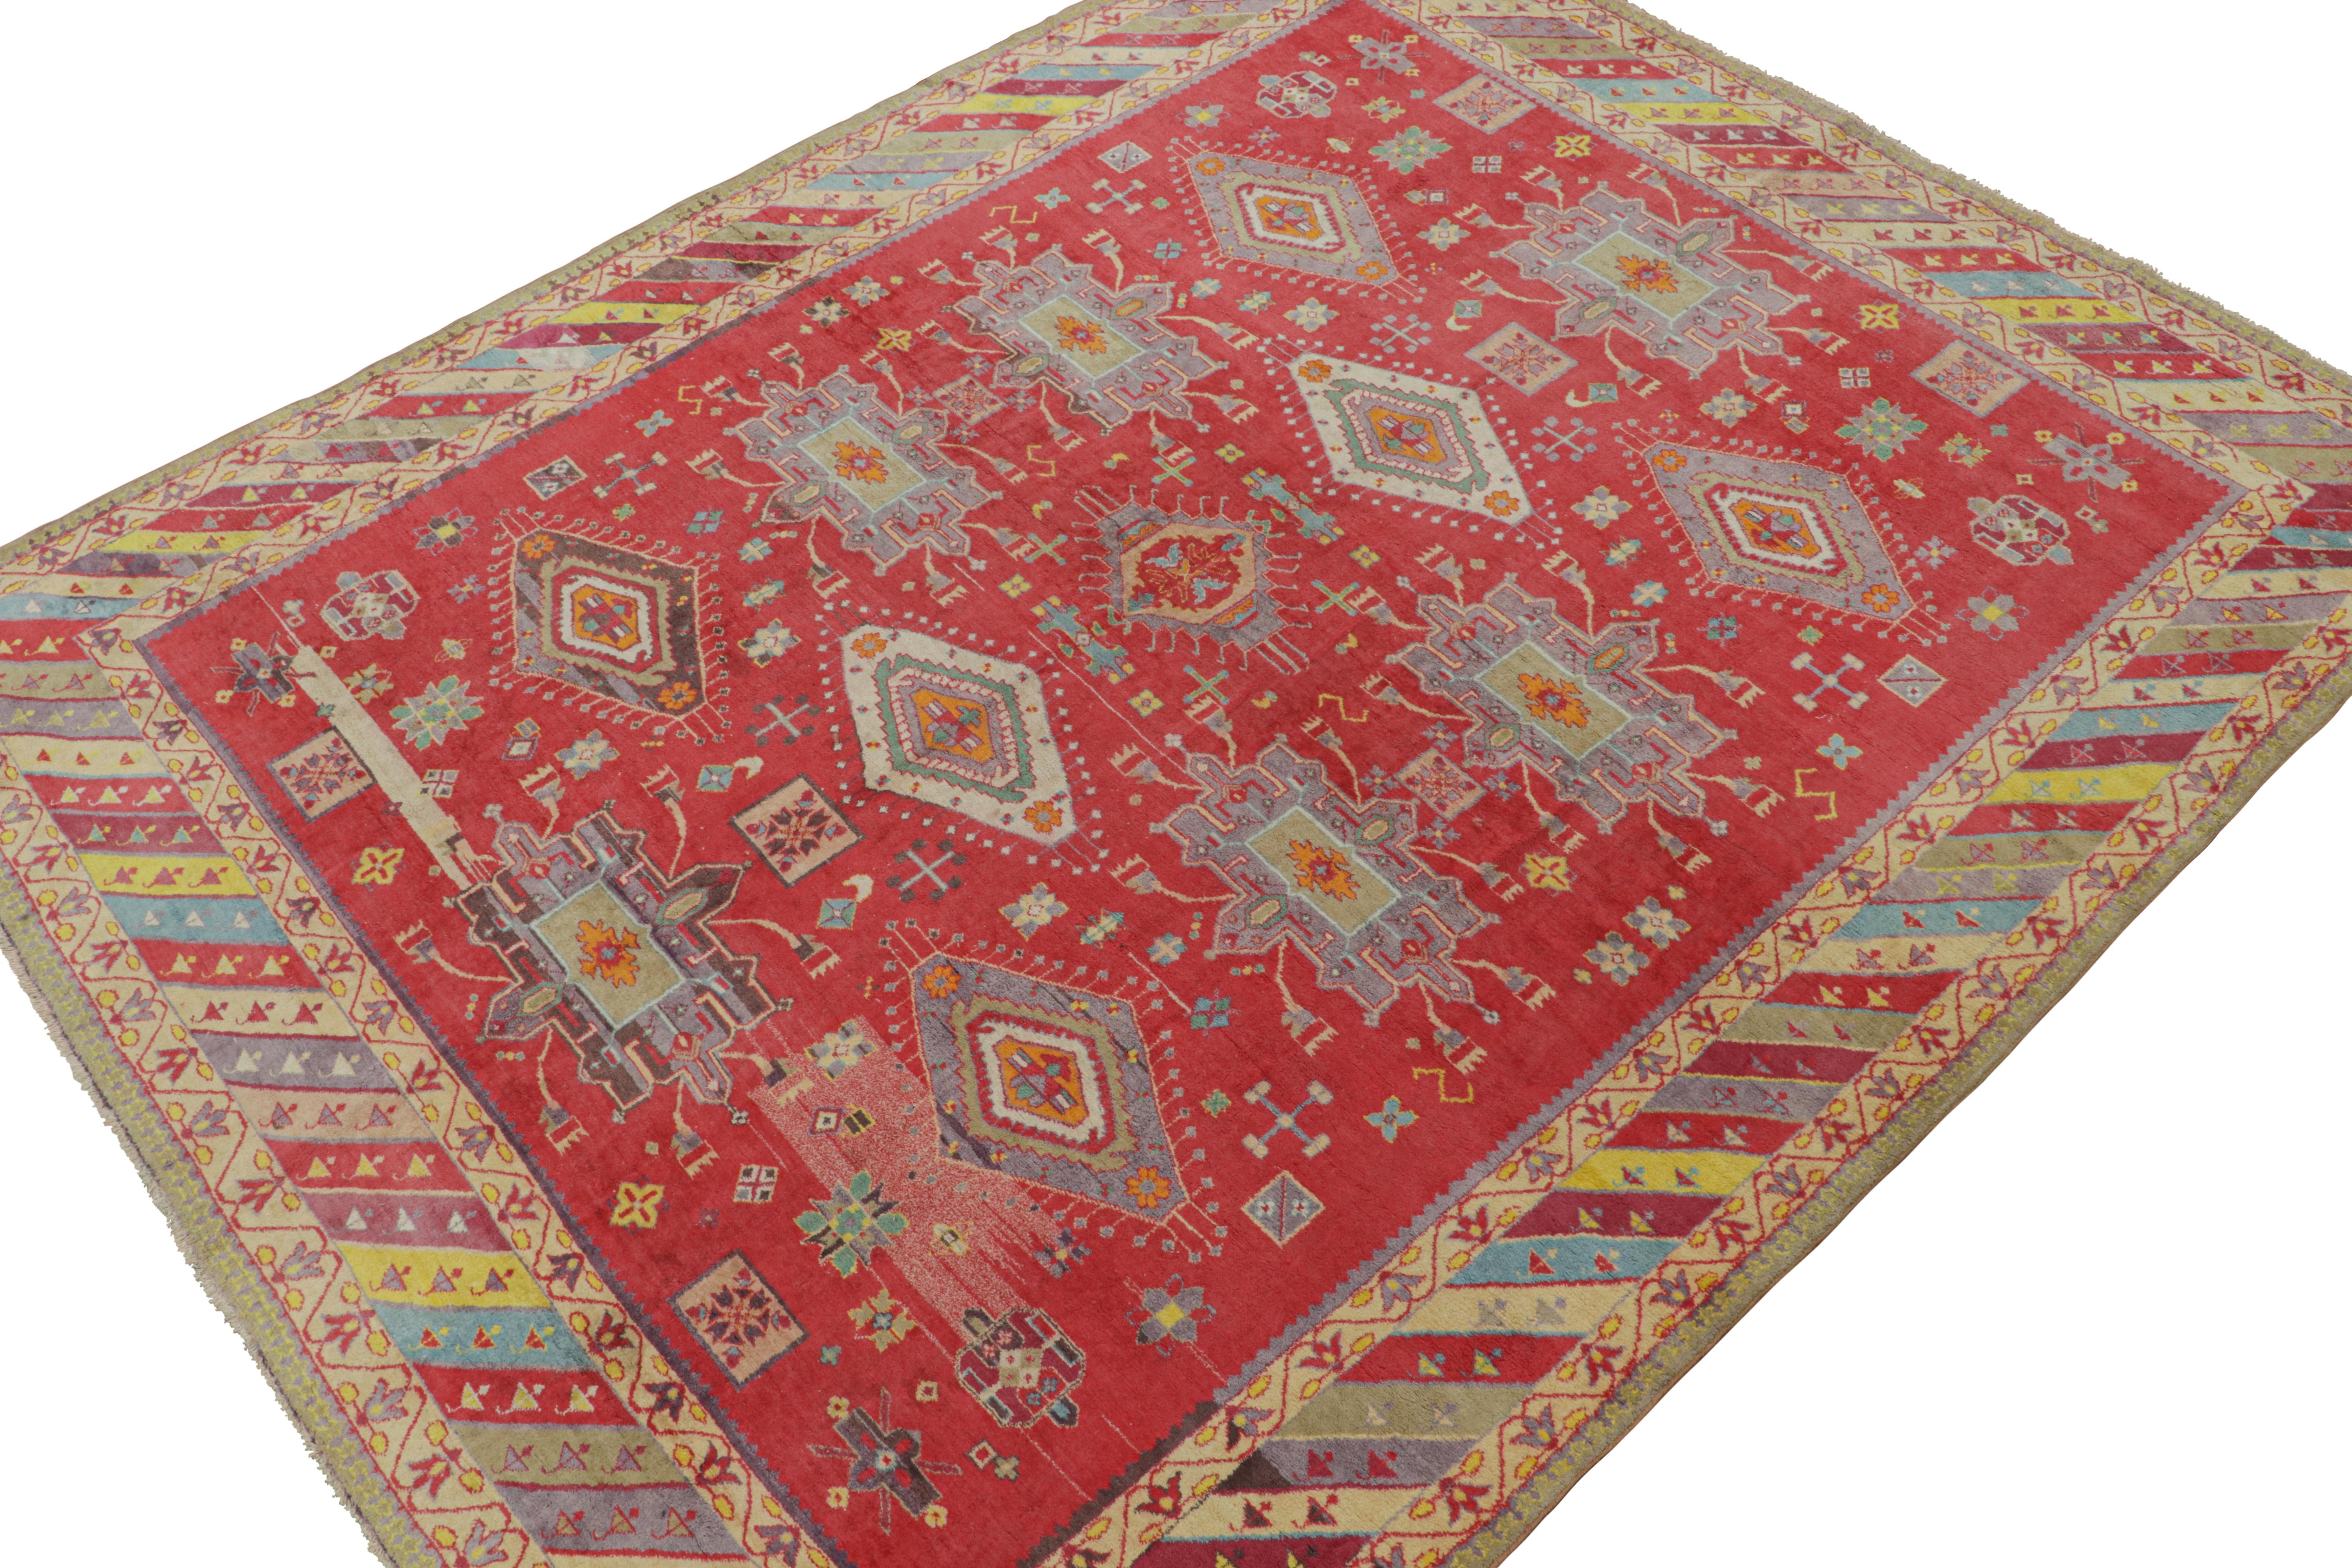 Hand-knotted in cotton and originating from India circa 1920-1930, this 9x12 antique Agra rug is an exciting new curation from Rug & Kilim. 

On the Design: 

Keen eyes will admire the variety of bright and vibrant jewel tones, and the fabulous